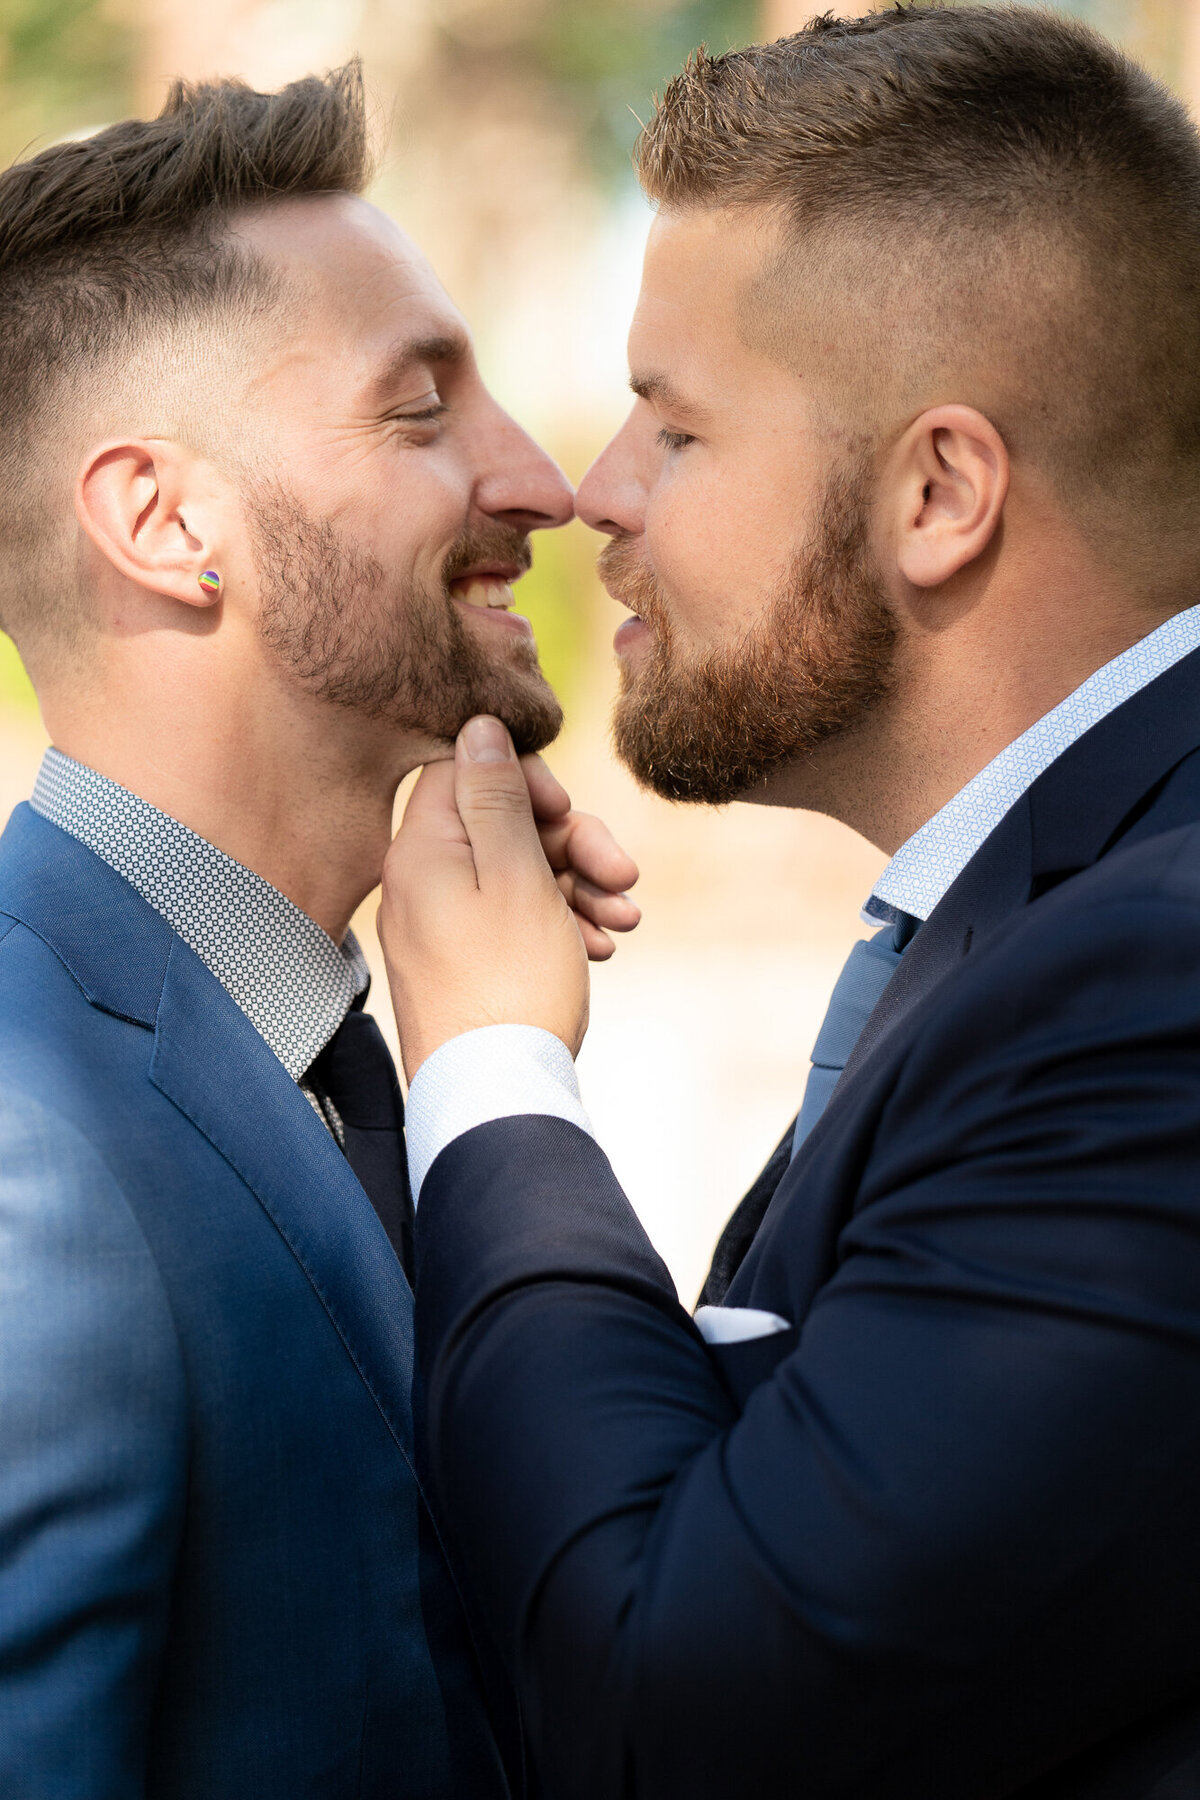 Grooms smile at each other while wearing blue suits.